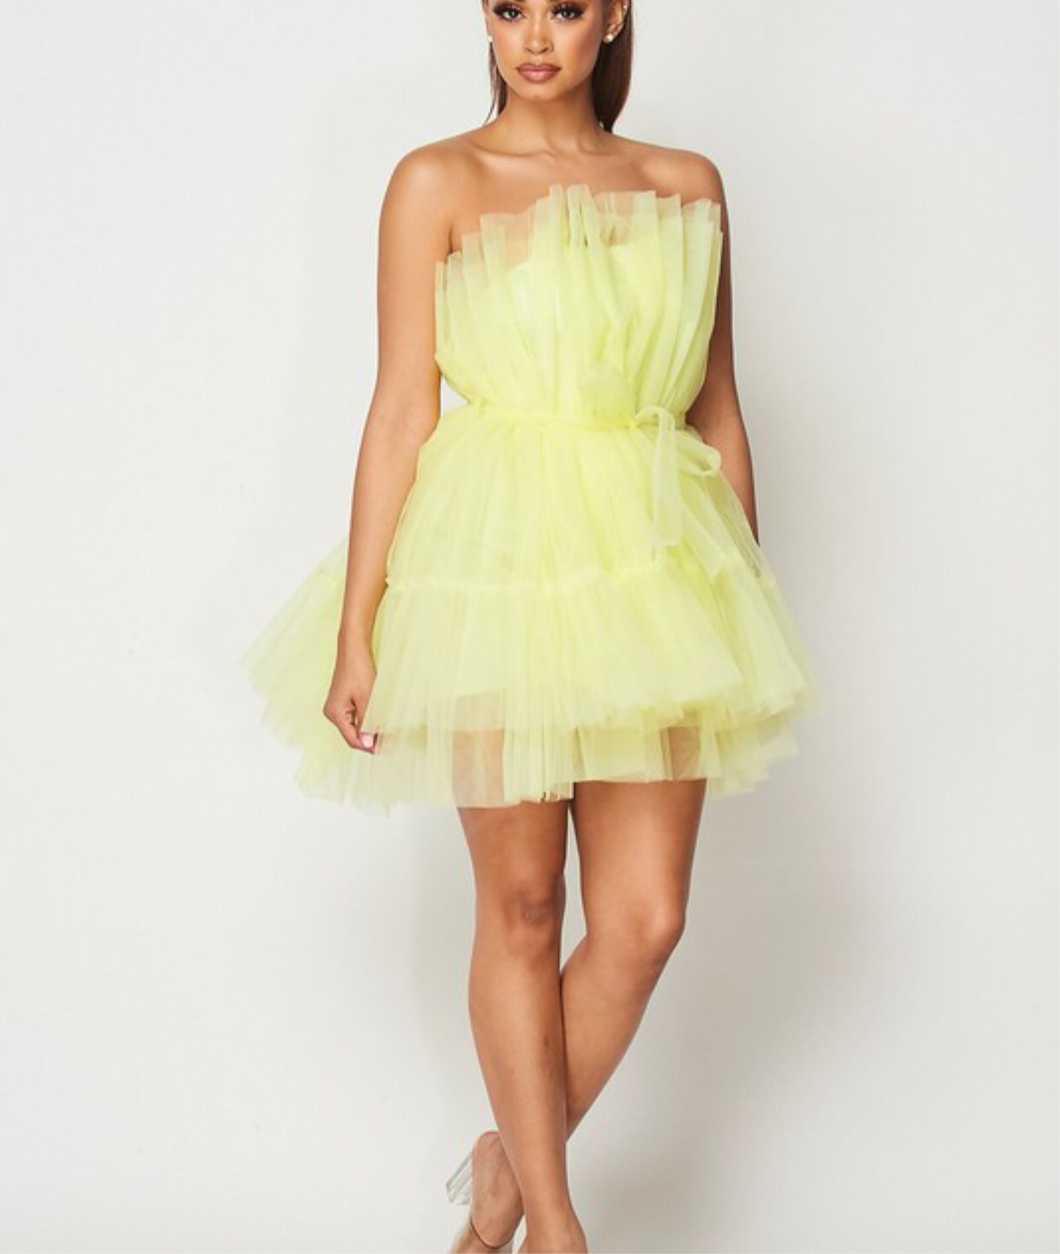 Too tulle for cool, ruffle dress